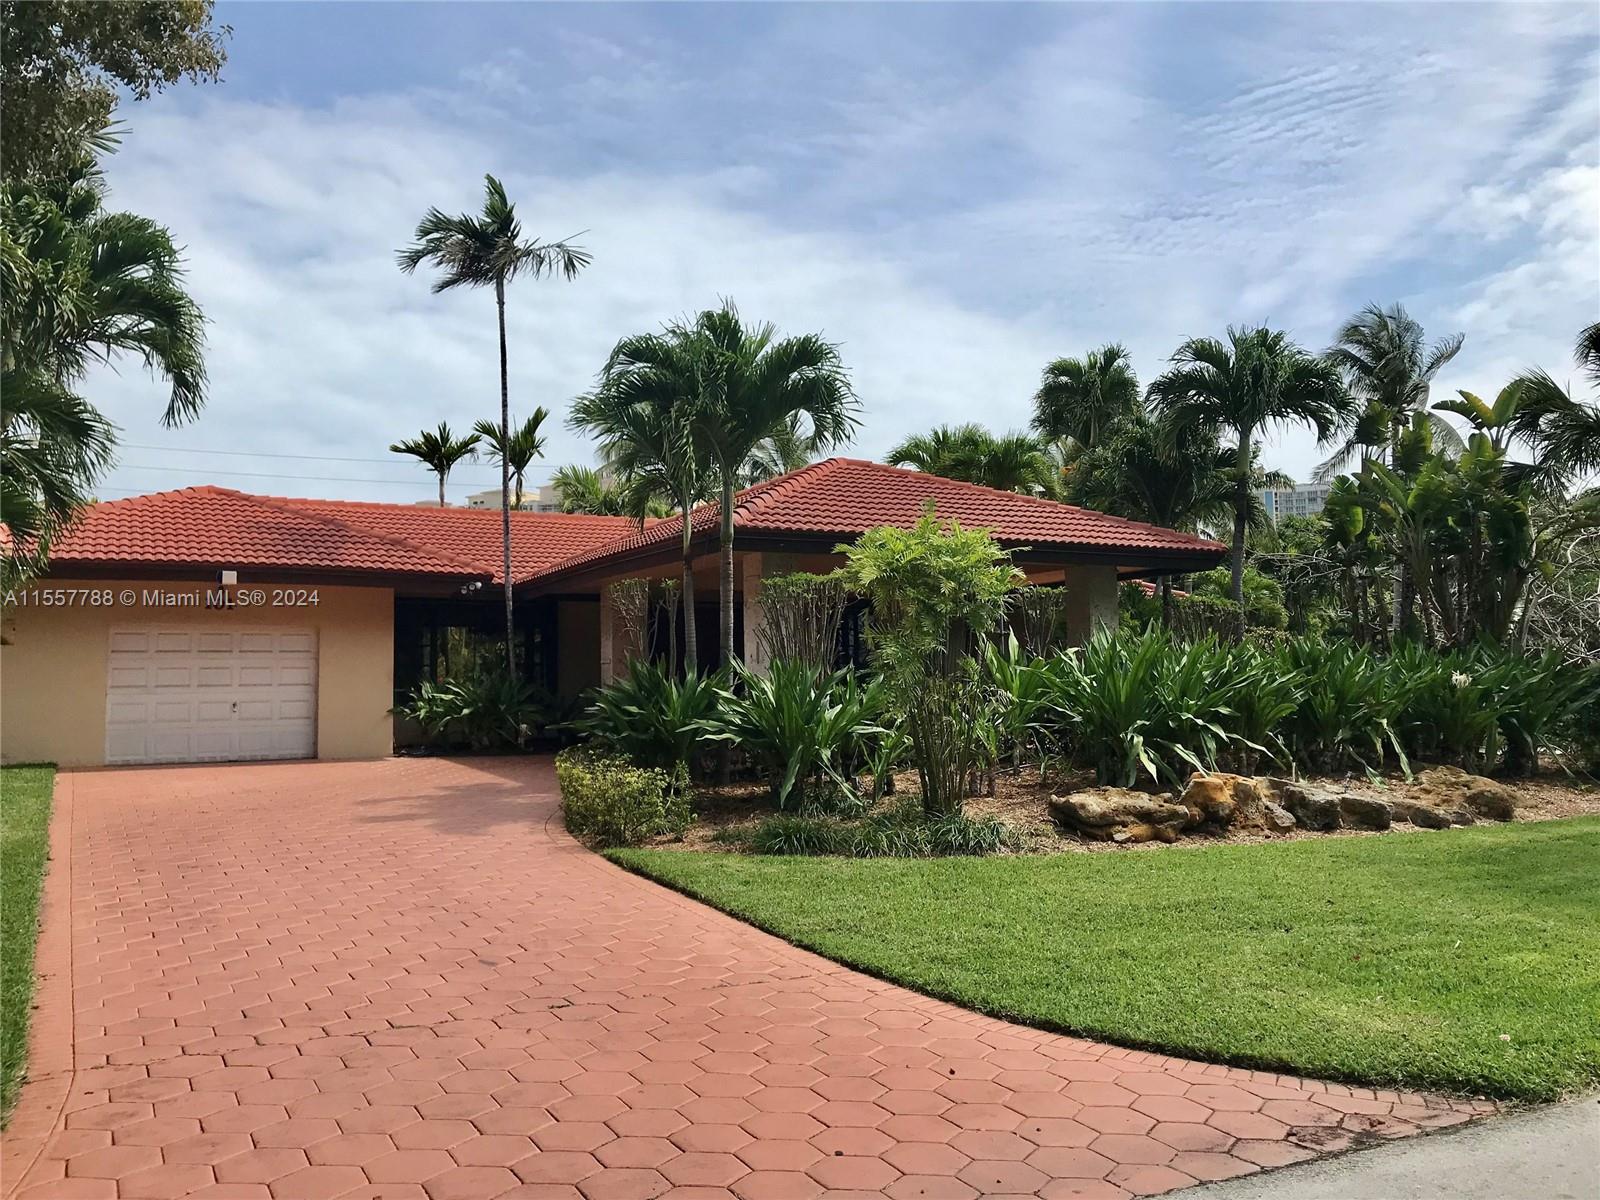 Island Drive corner lot (100x150 as per tax roll ) residence for sale in exclusive Cape Florida Subdivision.
Owner built in 1988, a 3 bedroom, 3 bath plus maid quarters in 3,318 sq. ft. of living area. Elevated lot at 9ft. as per elevation certificate. Offered in “as is” condition. Priced at appraised value.